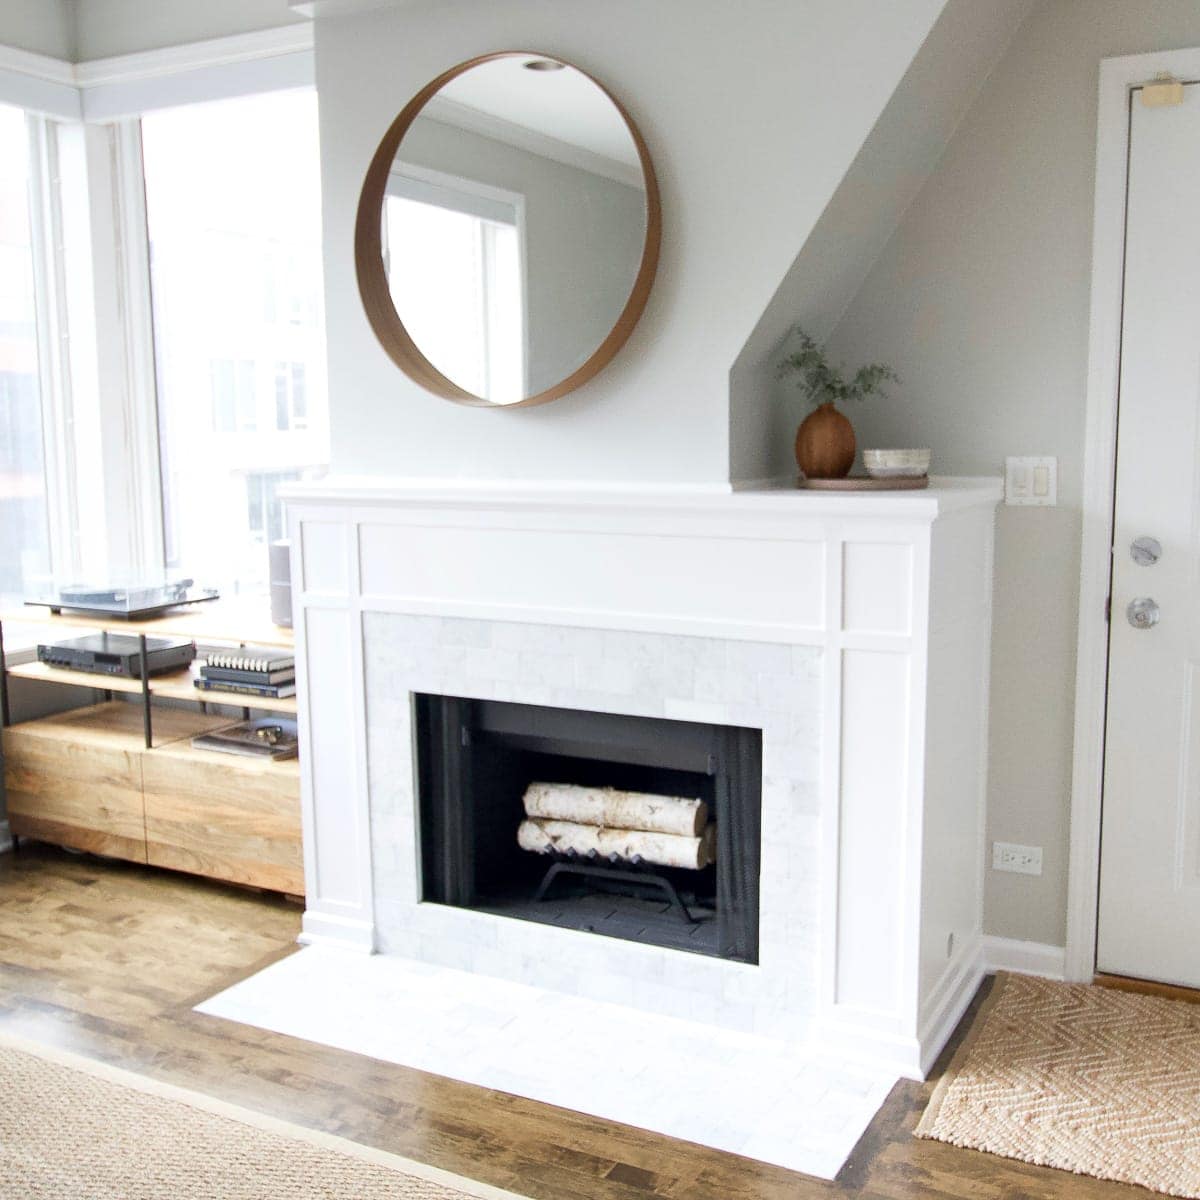 Our fireplace makeover